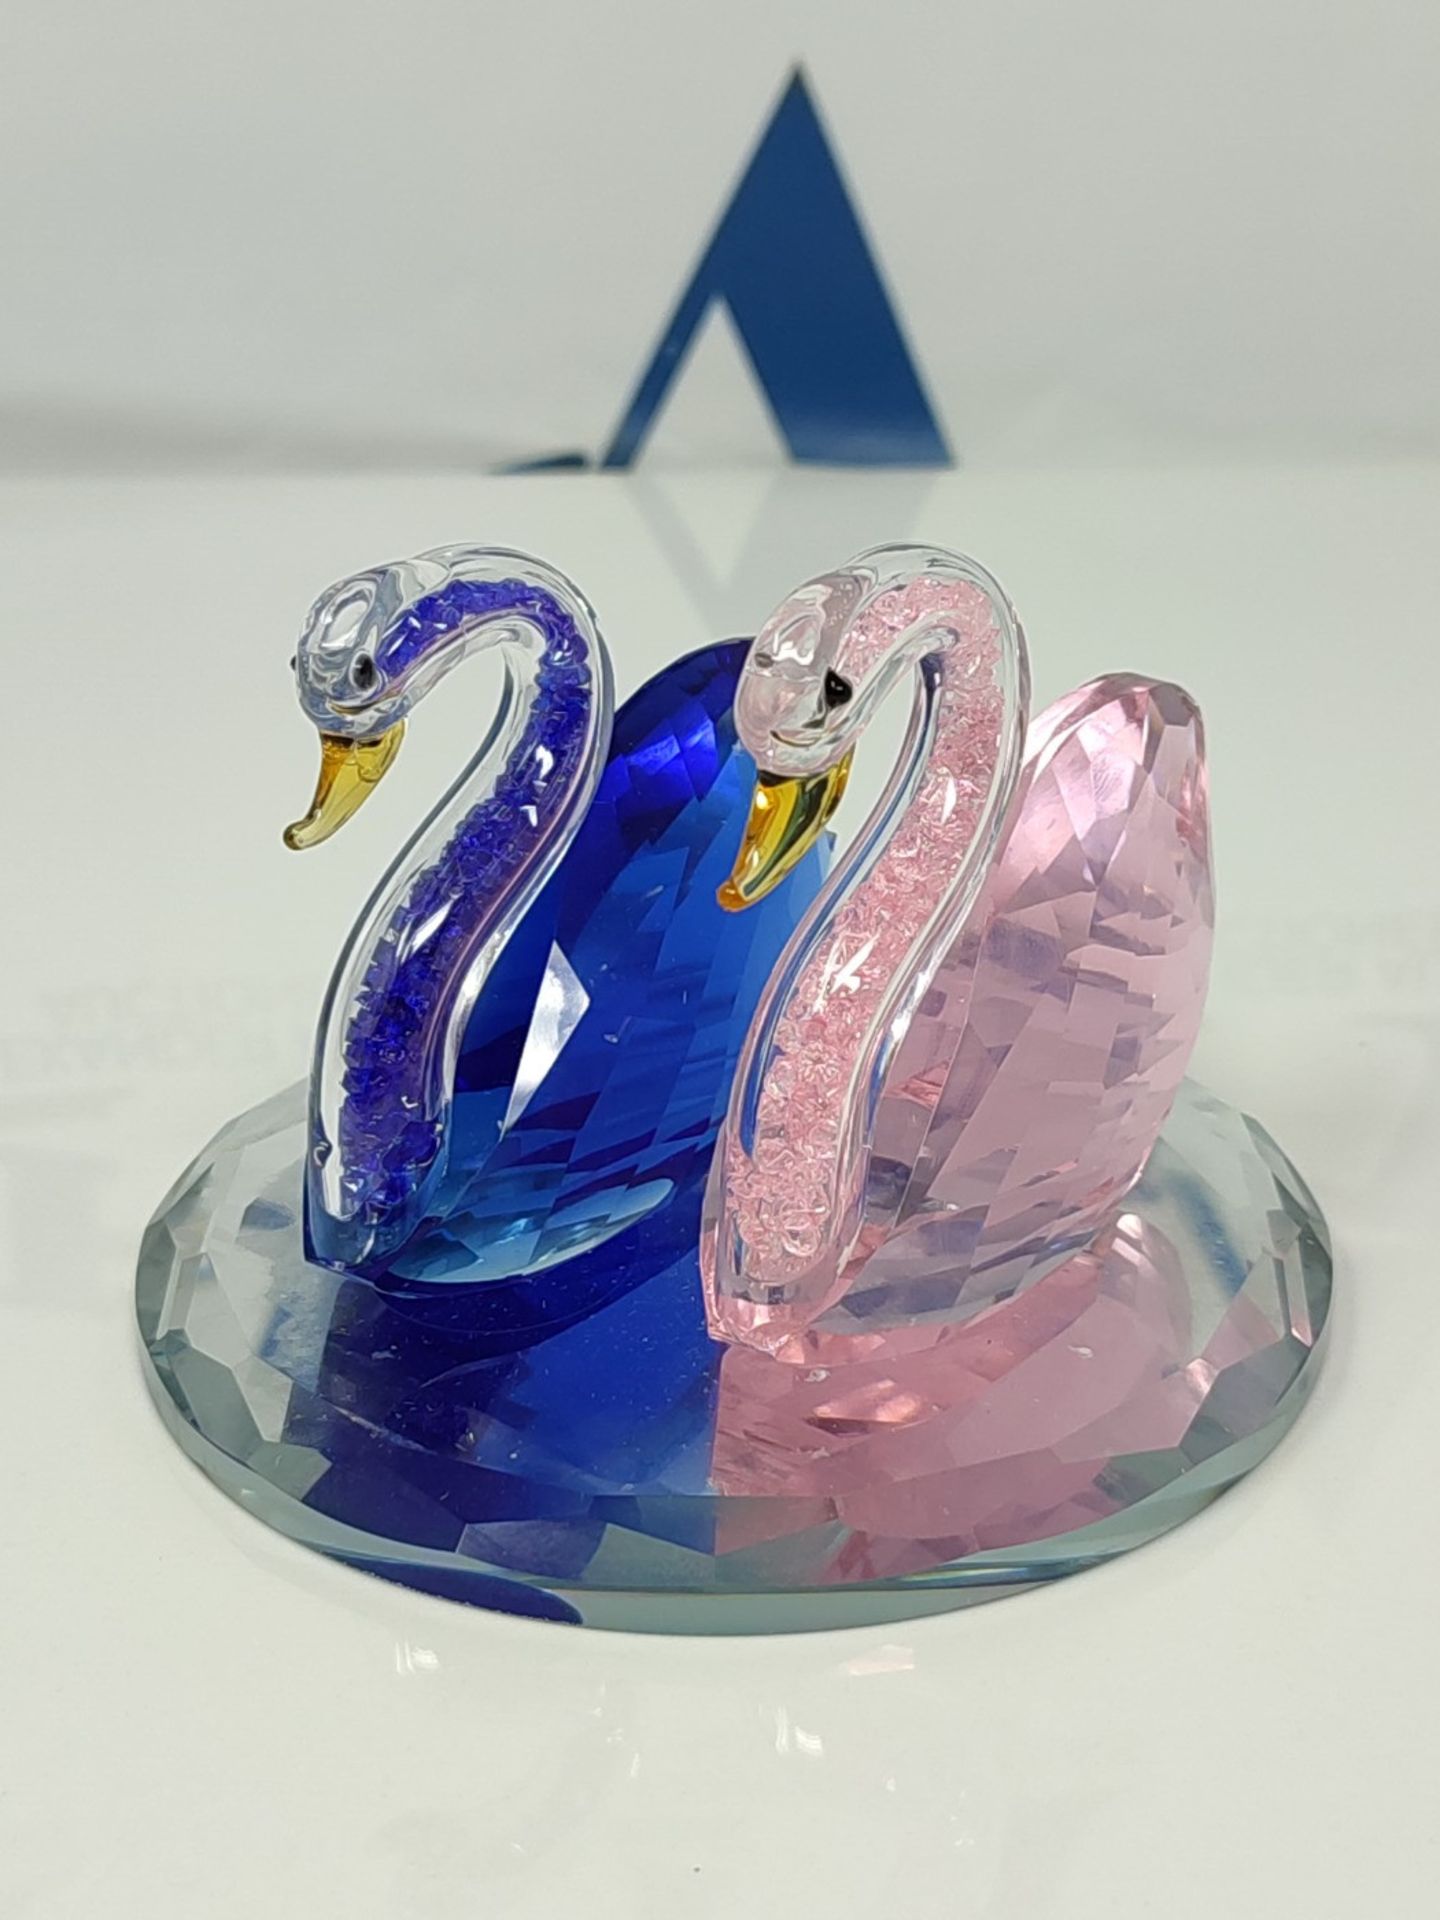 London Boutique Crystal Swan Wedding Pink Blue Figurine Ornaments for Living Room